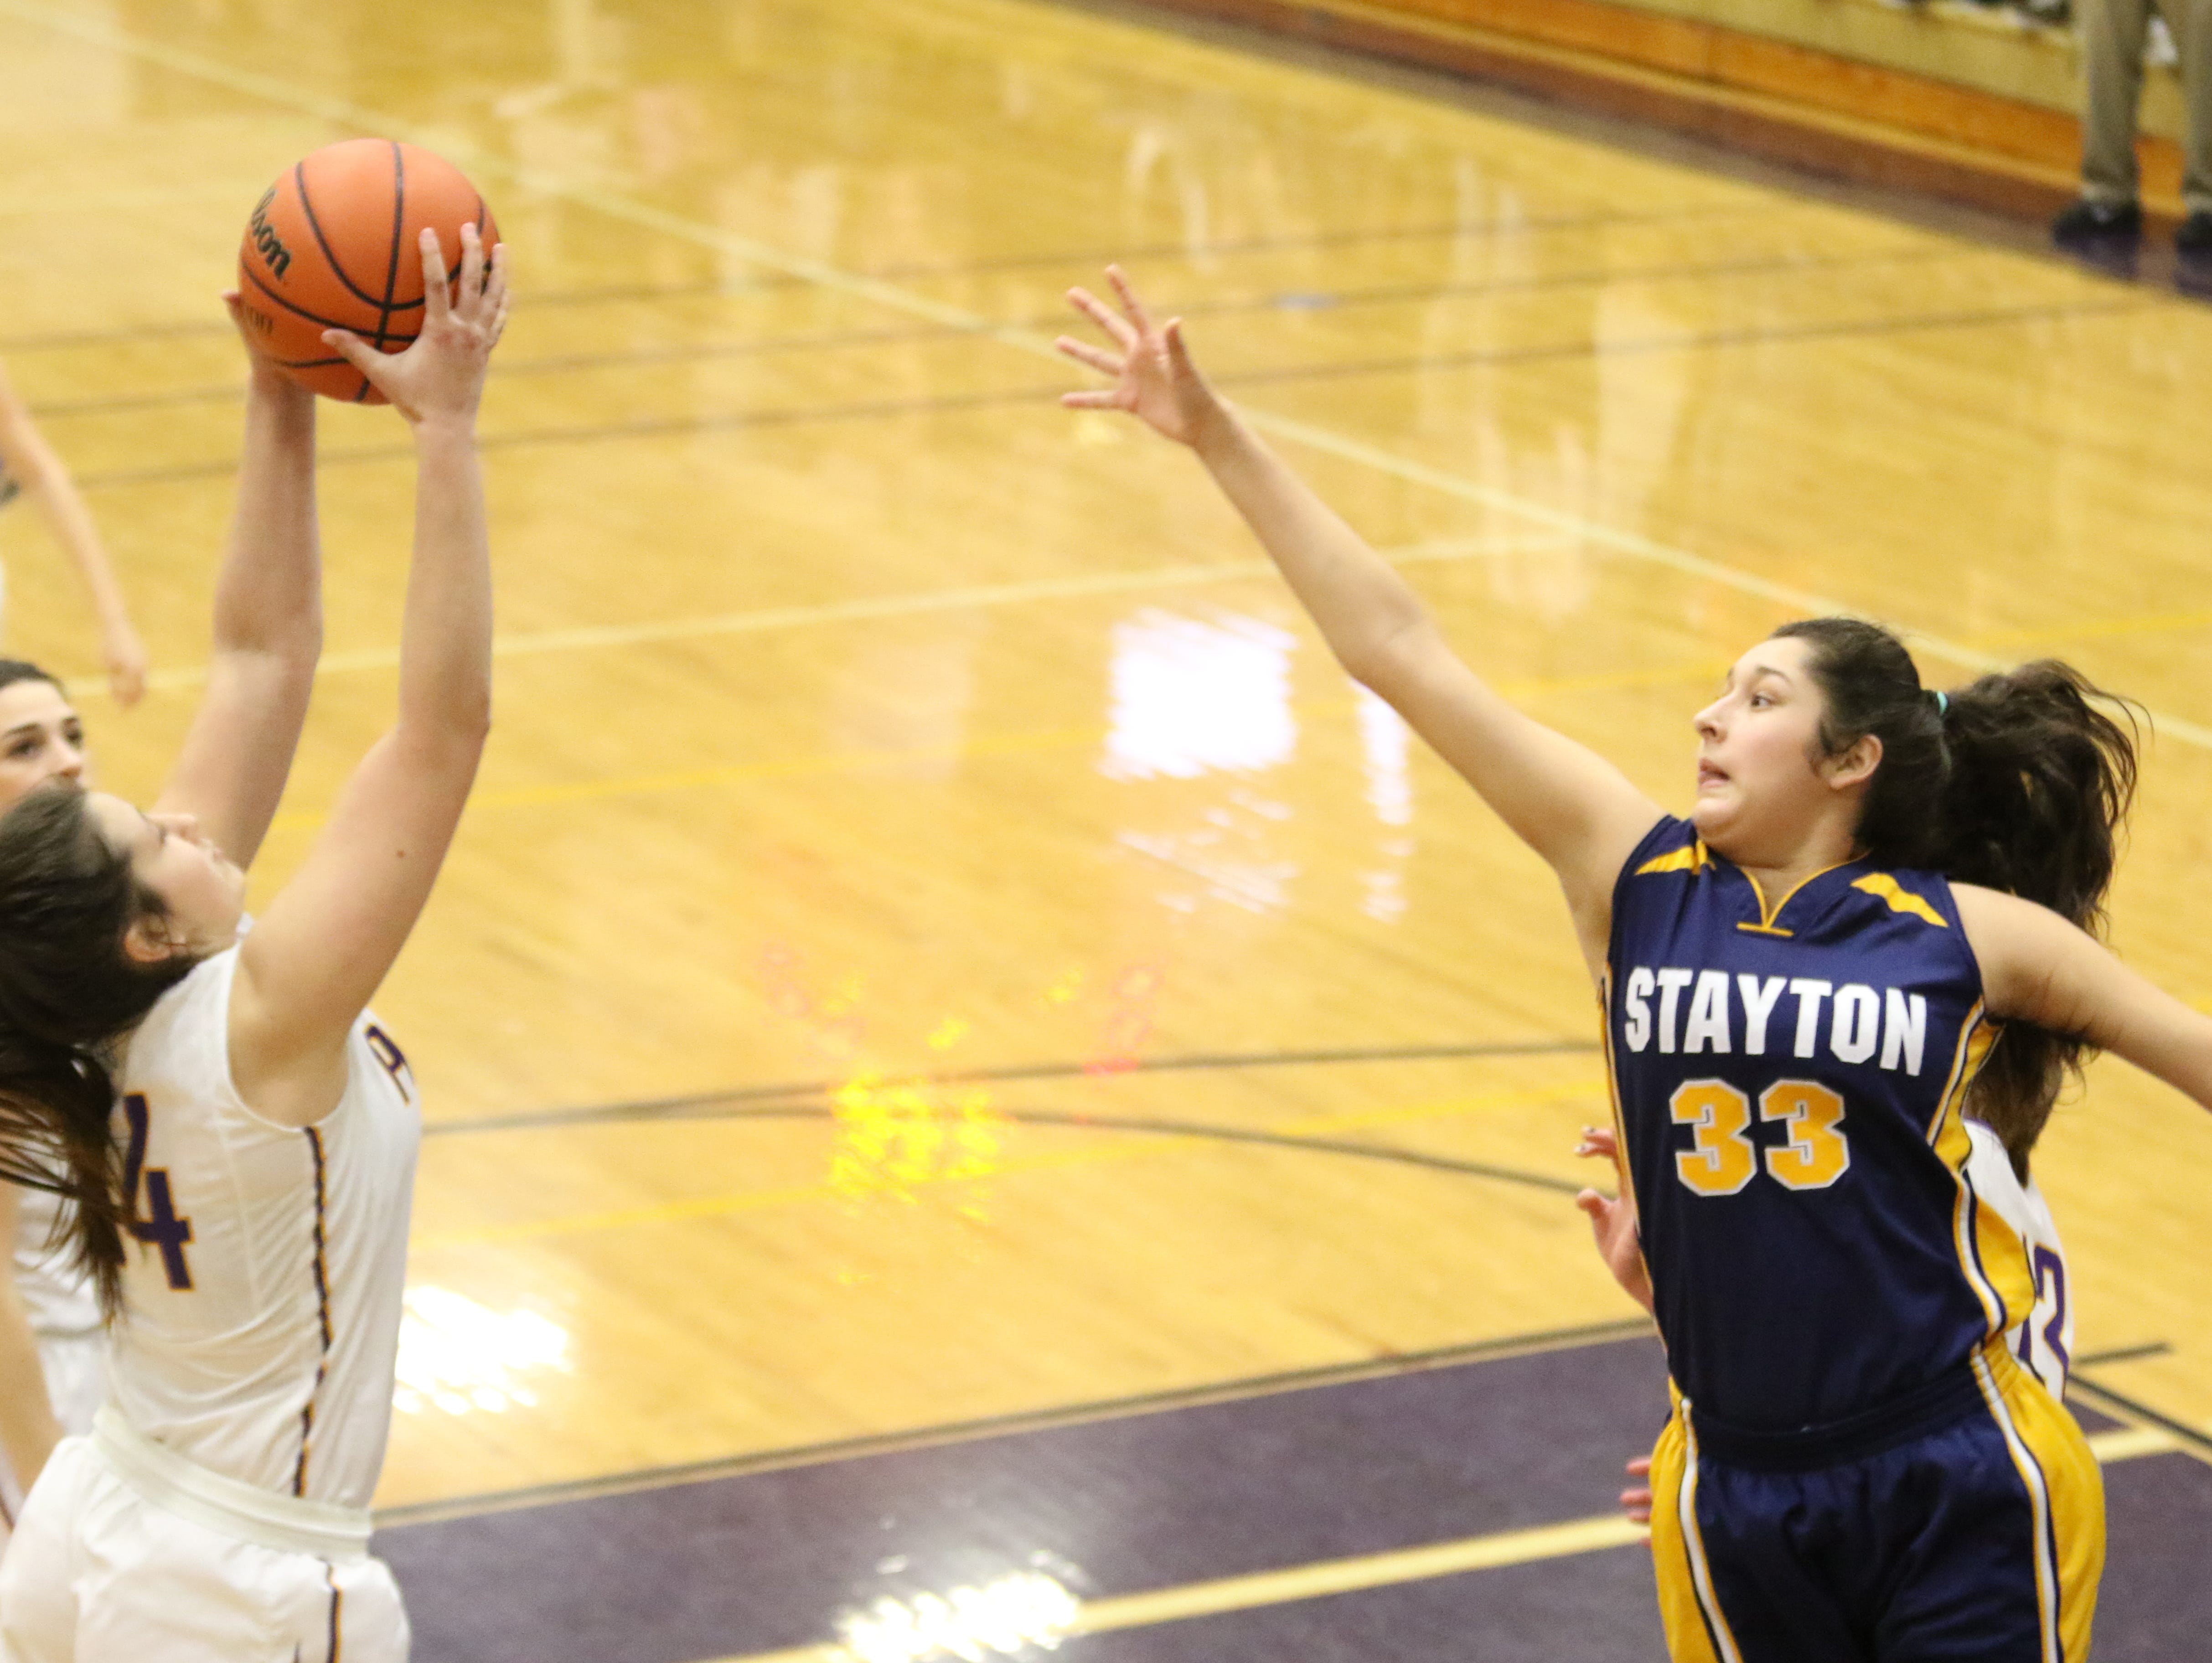 Stayton's Marri Martinez-Pallares (33) reaches for the ball against Marshfield on Saturday, March 4, 2017.